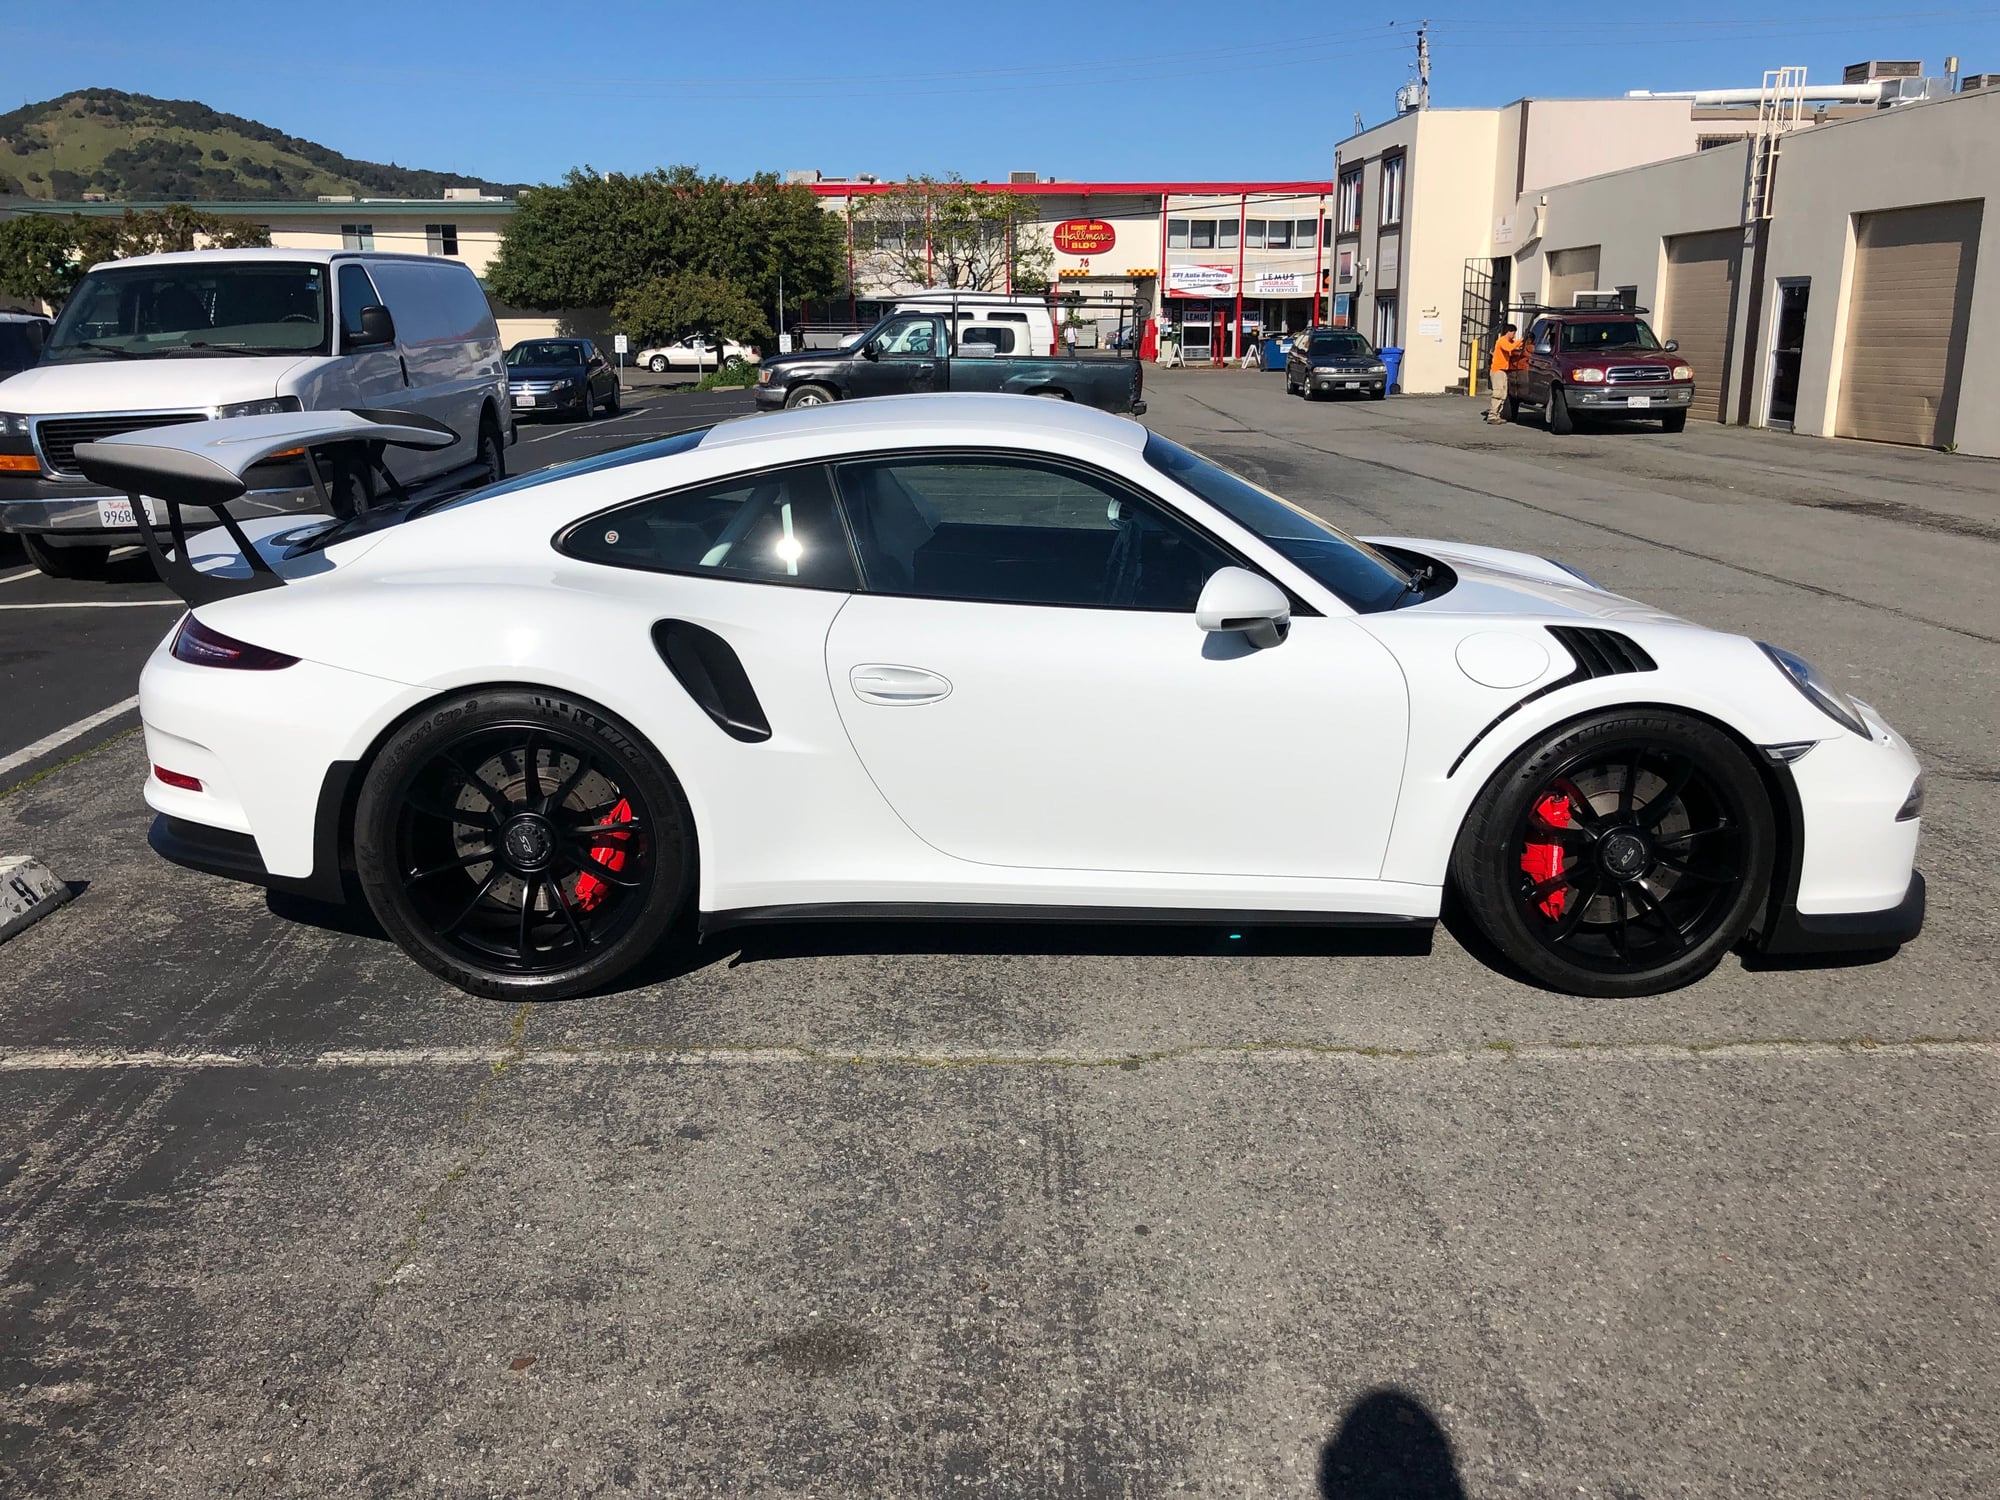 2016 Porsche 911 - 2016 Porsche GT3 RS  **No stories, CPO, one of lowest priced in US** - Used - VIN WP0AF2A9XGS187113 - 20,100 Miles - 6 cyl - 2WD - Automatic - Coupe - White - San Rafael, CA 94901, United States